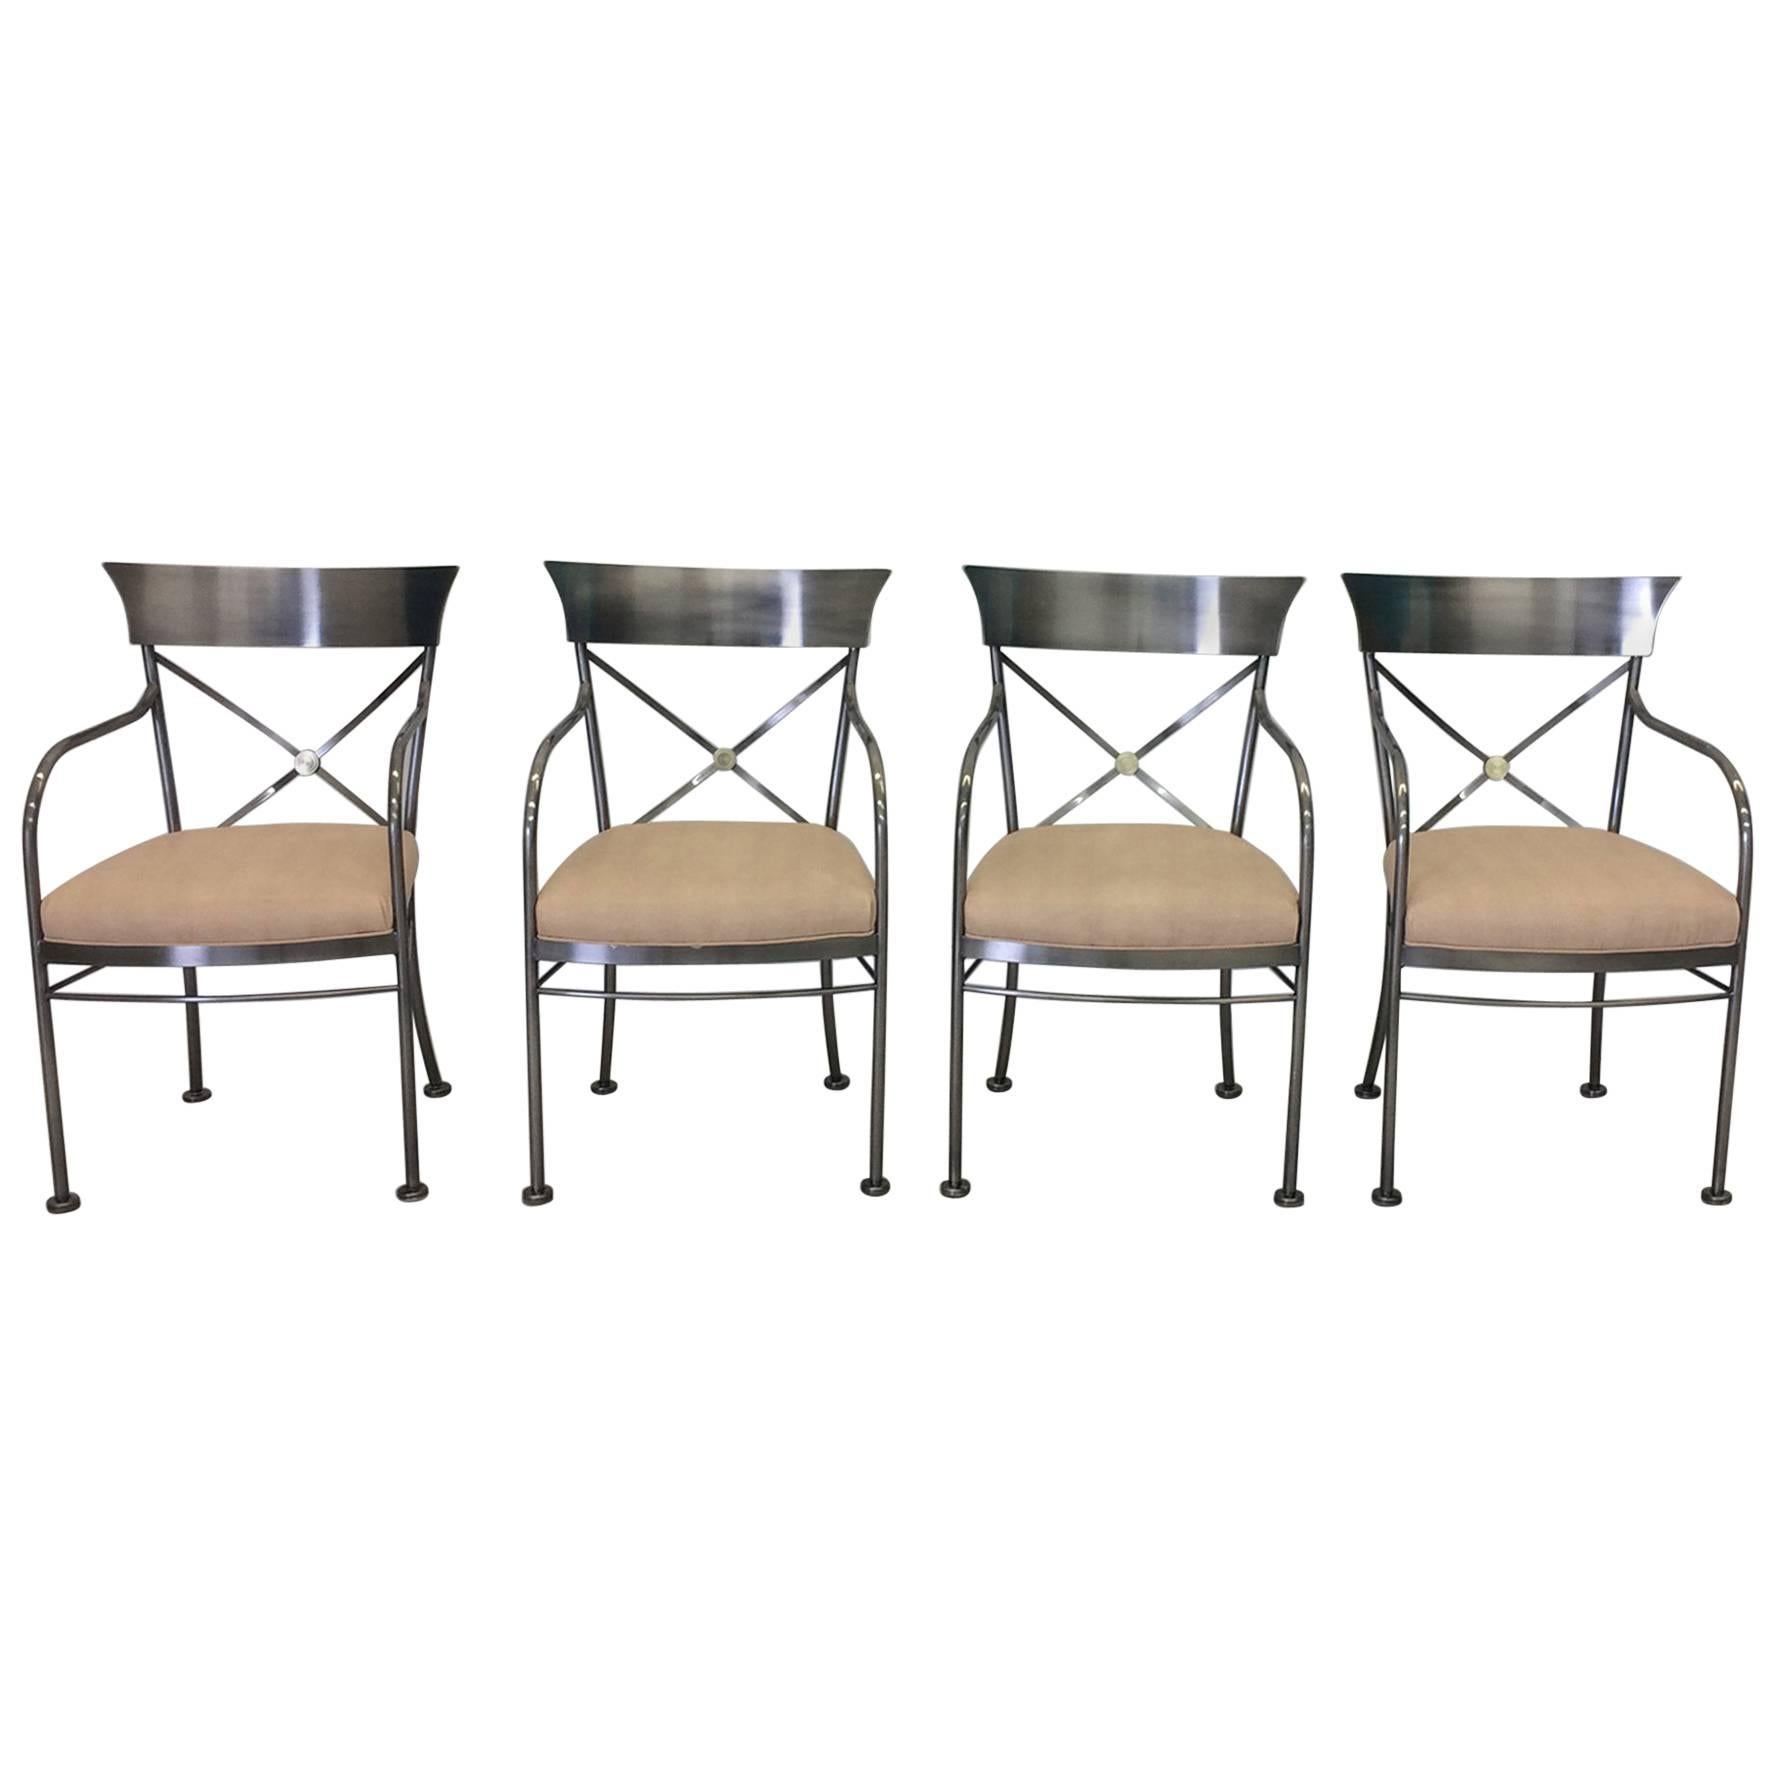 Four Chrome and Brass Armchairs DIA Design Institute of America